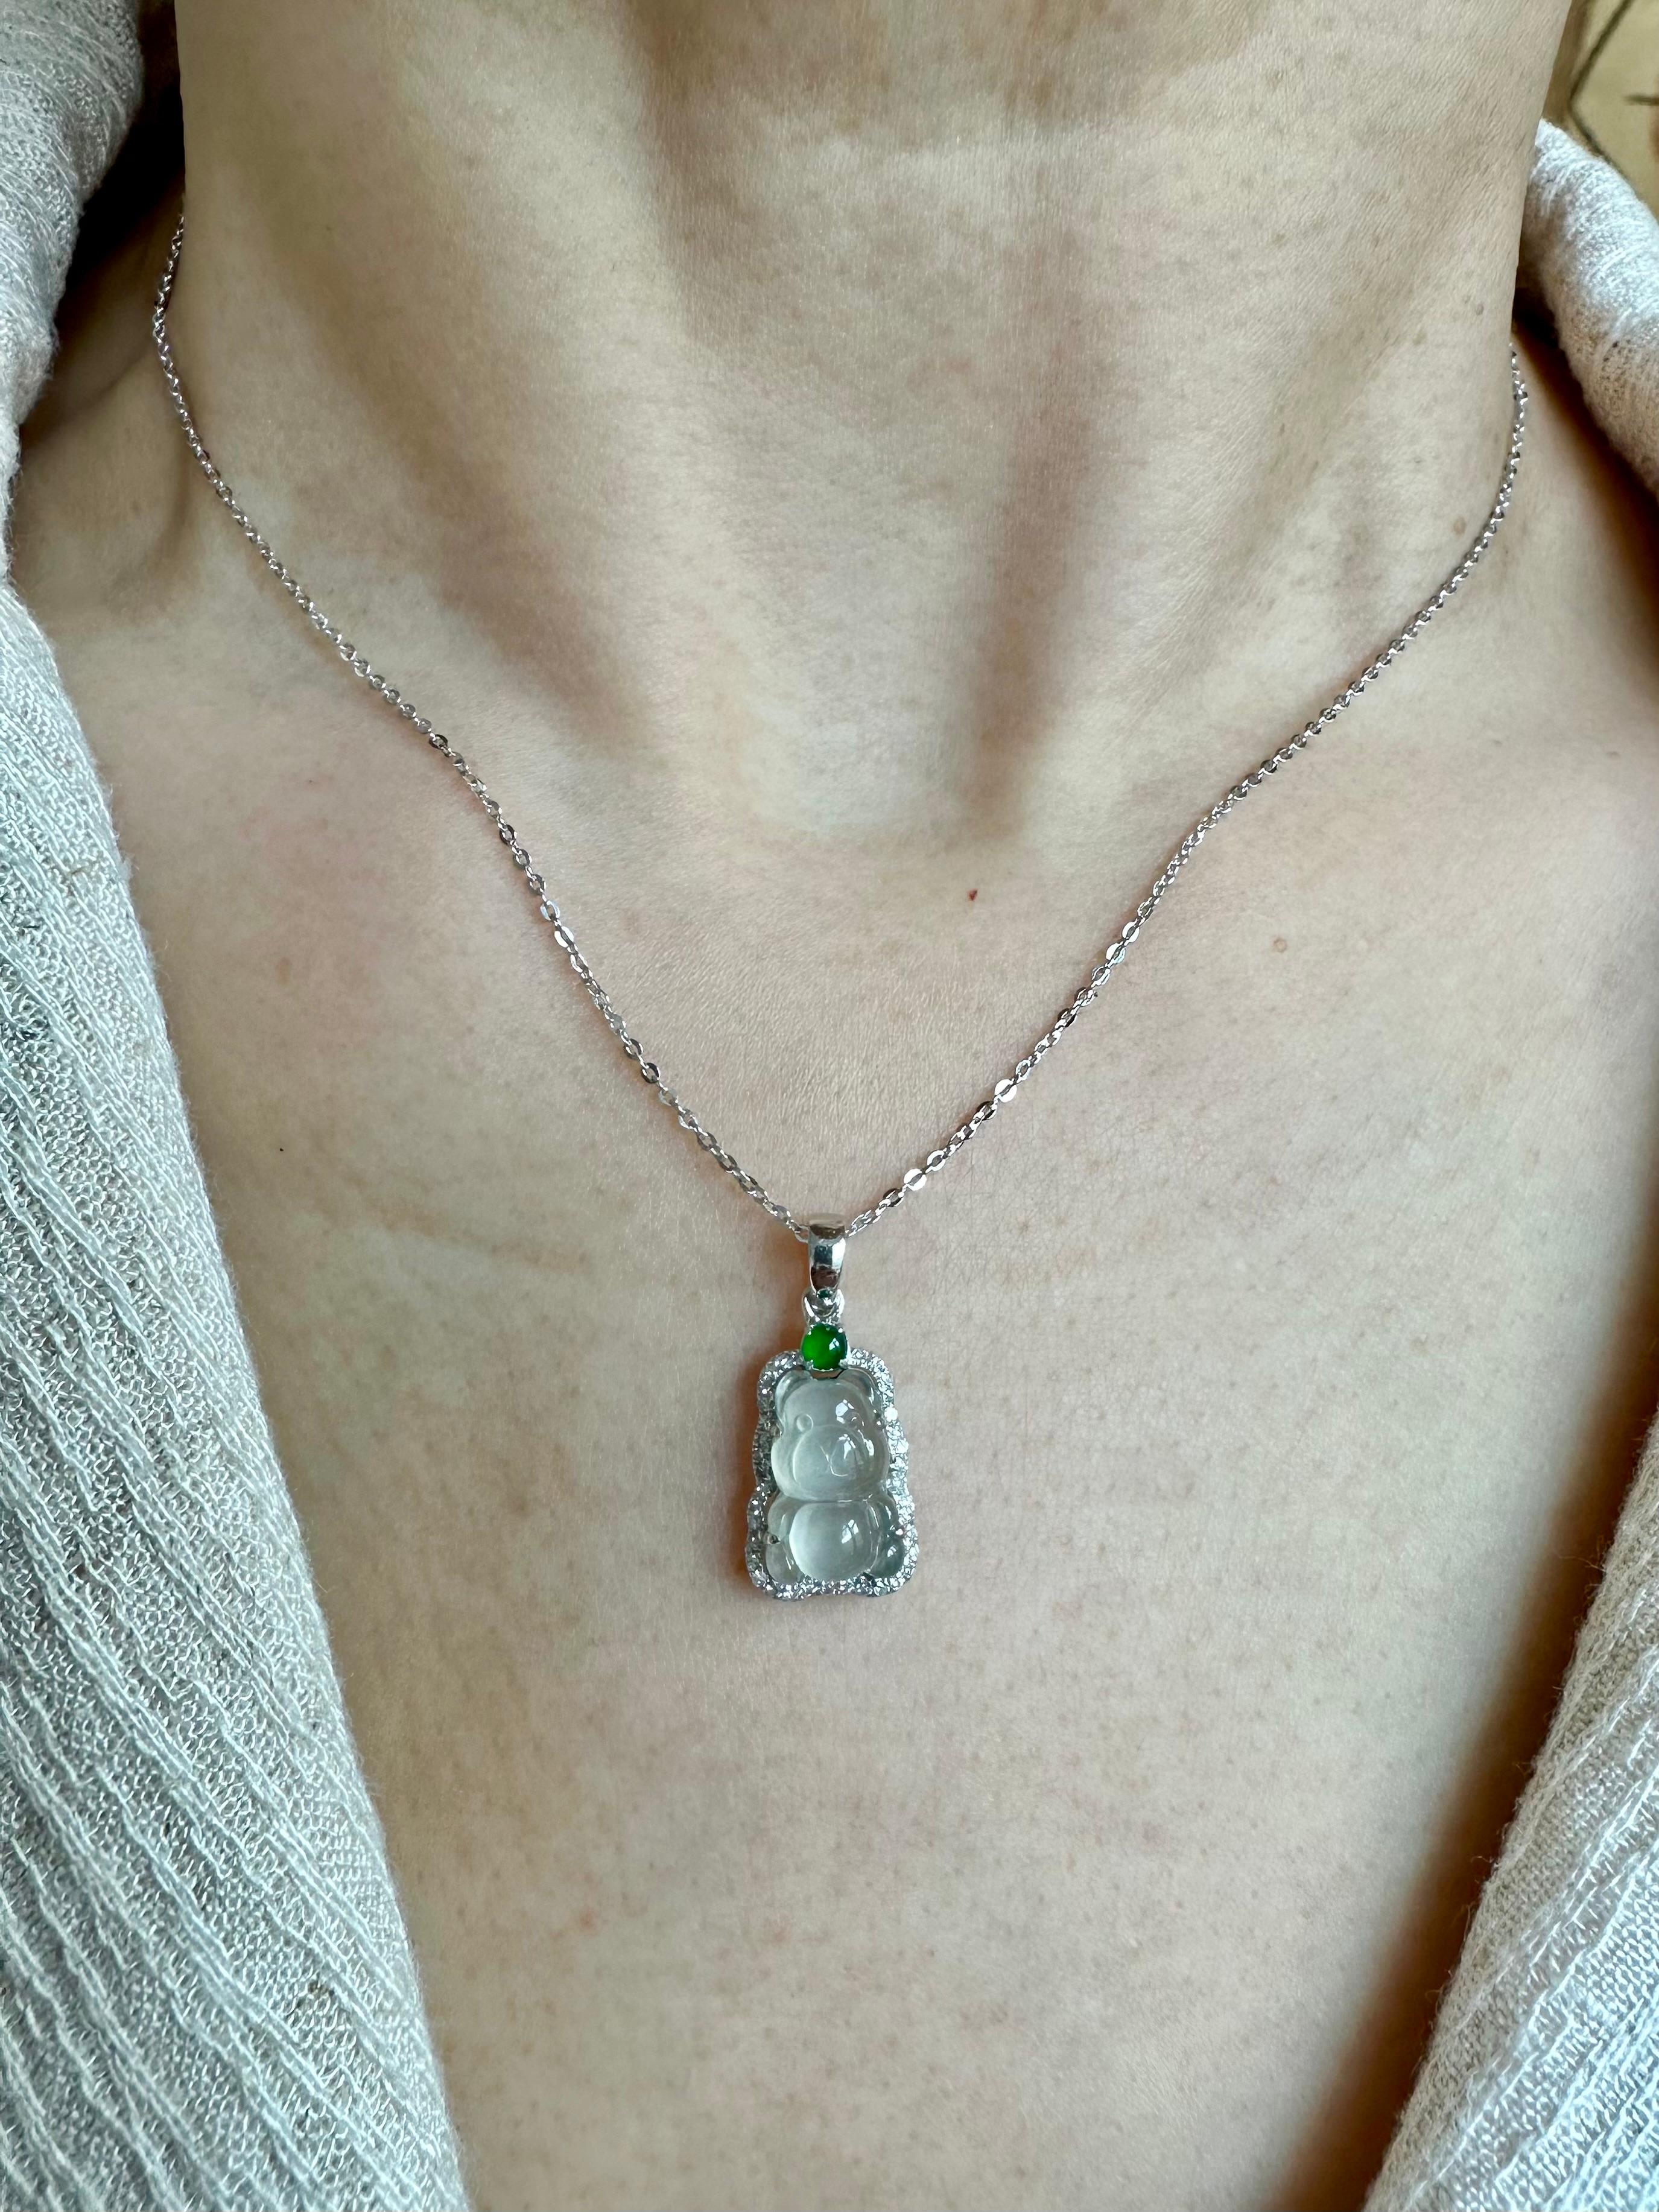 Please check out the HD video! The perfect icy jade pendant! This is a specialty gummy bear cut. Icy jade (certified) of this quality is extremely hard to come by and is in high demand. Even in higher demand is the imperial green jade cabochon. The